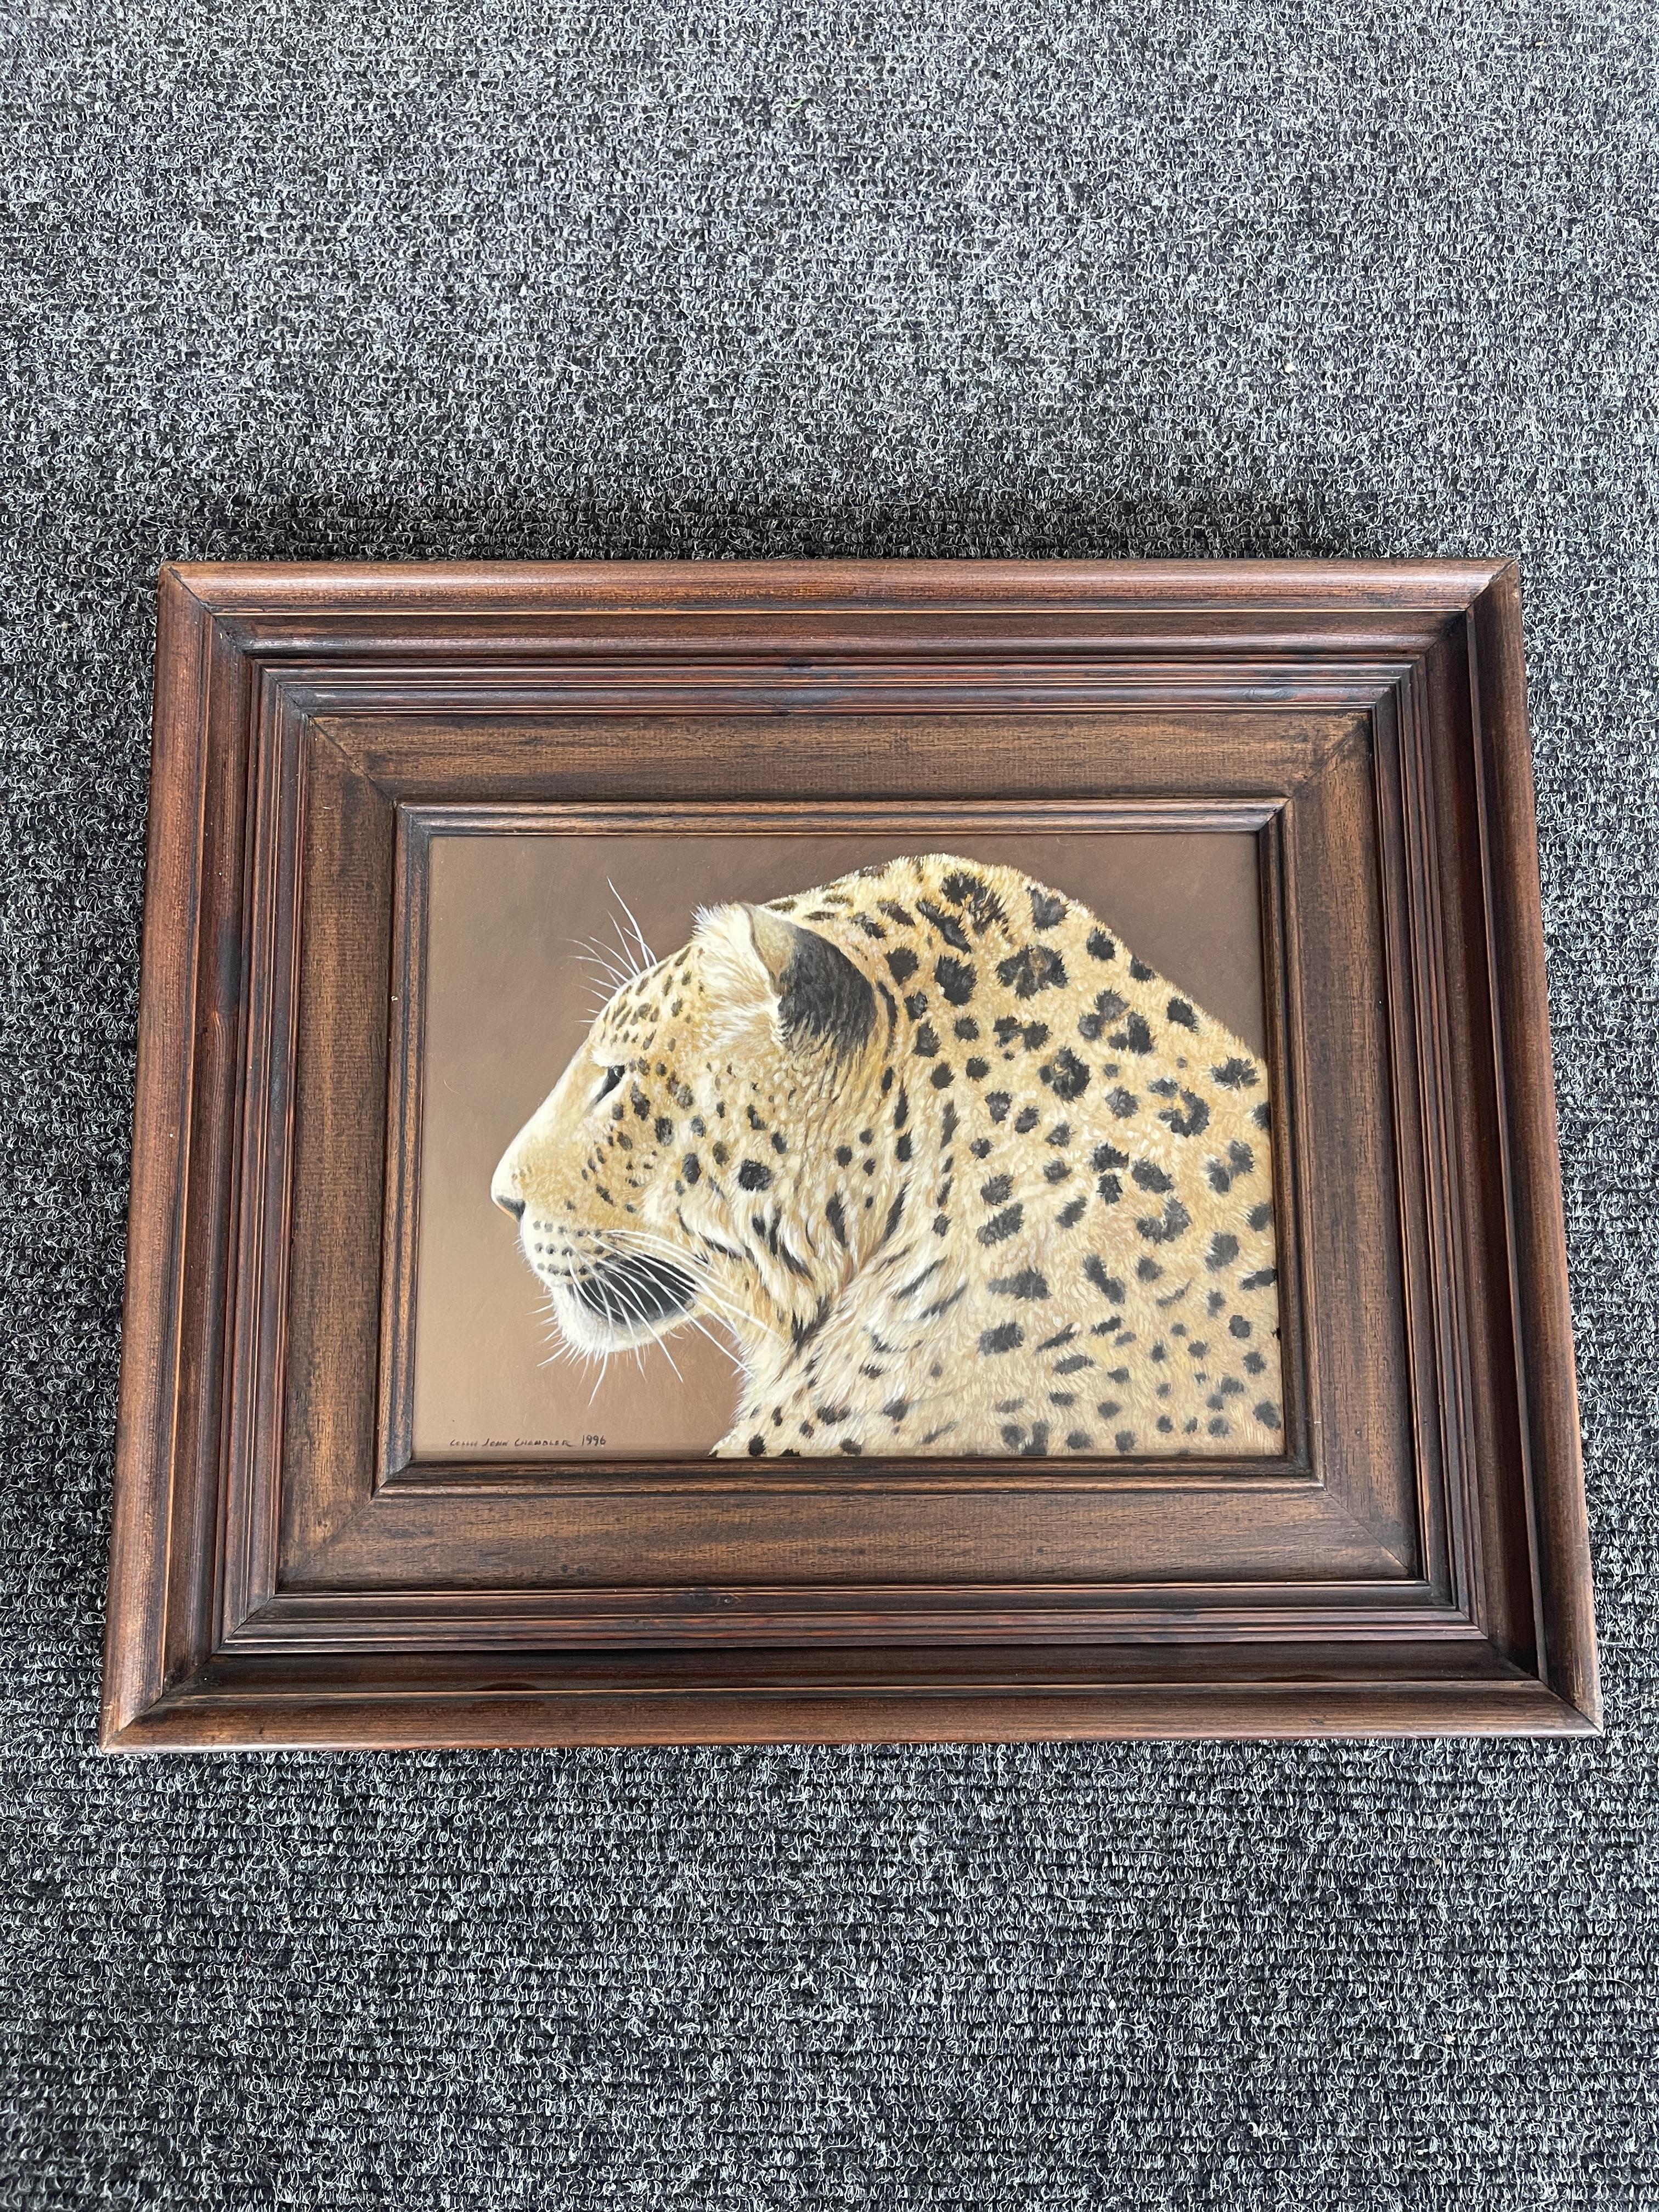 Signed and Framed Oil On Panel - Leopard - by Coli